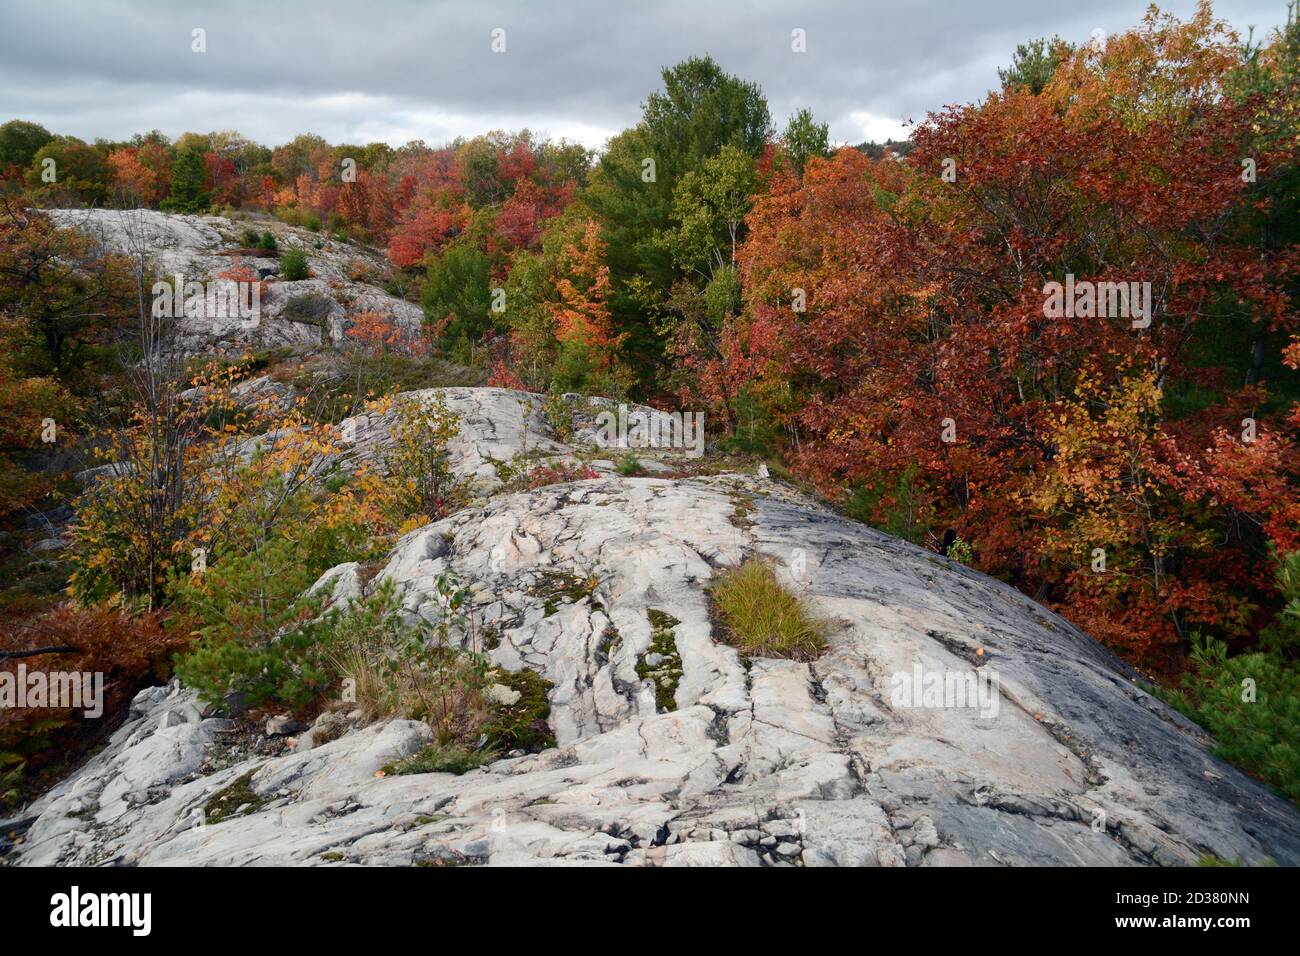 Autumn tree colours in a mixed coniferous and deciduous forest amid the quartzite hills of Killarney Provincial Park, Ontario, Canada. Stock Photo